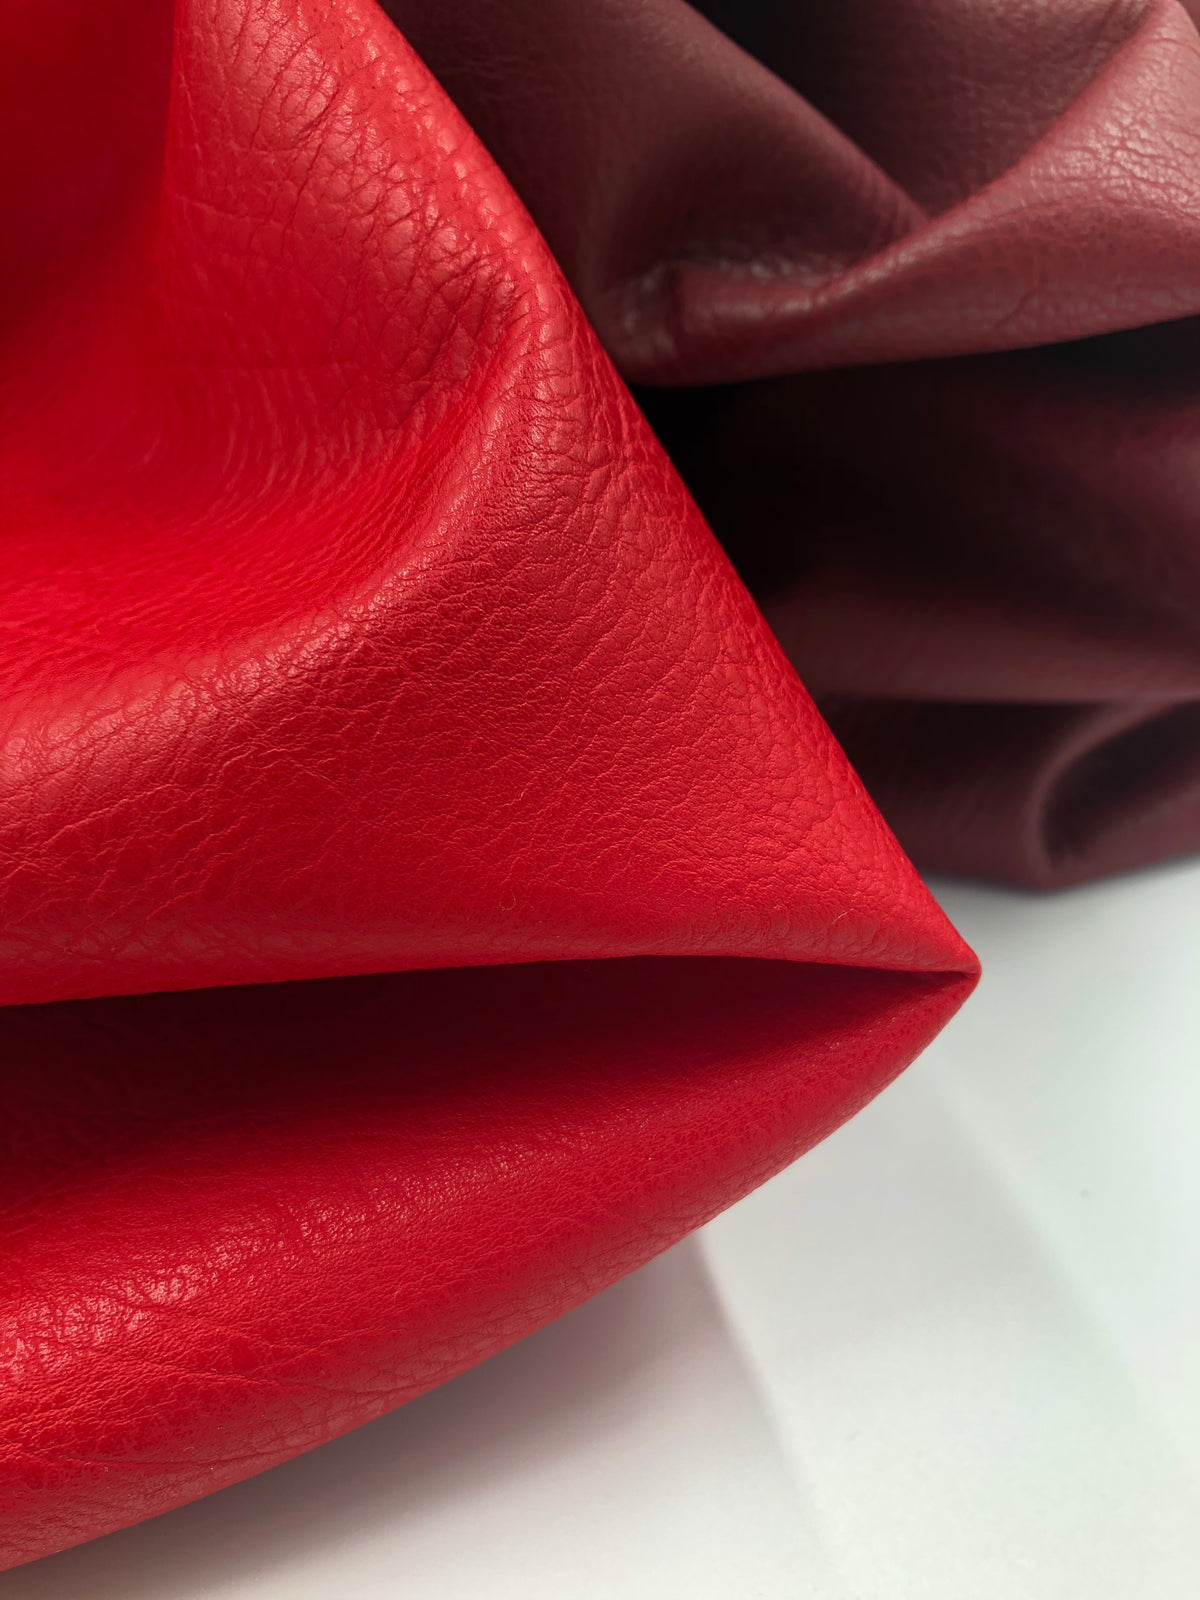 Sewing with Vegan Leather